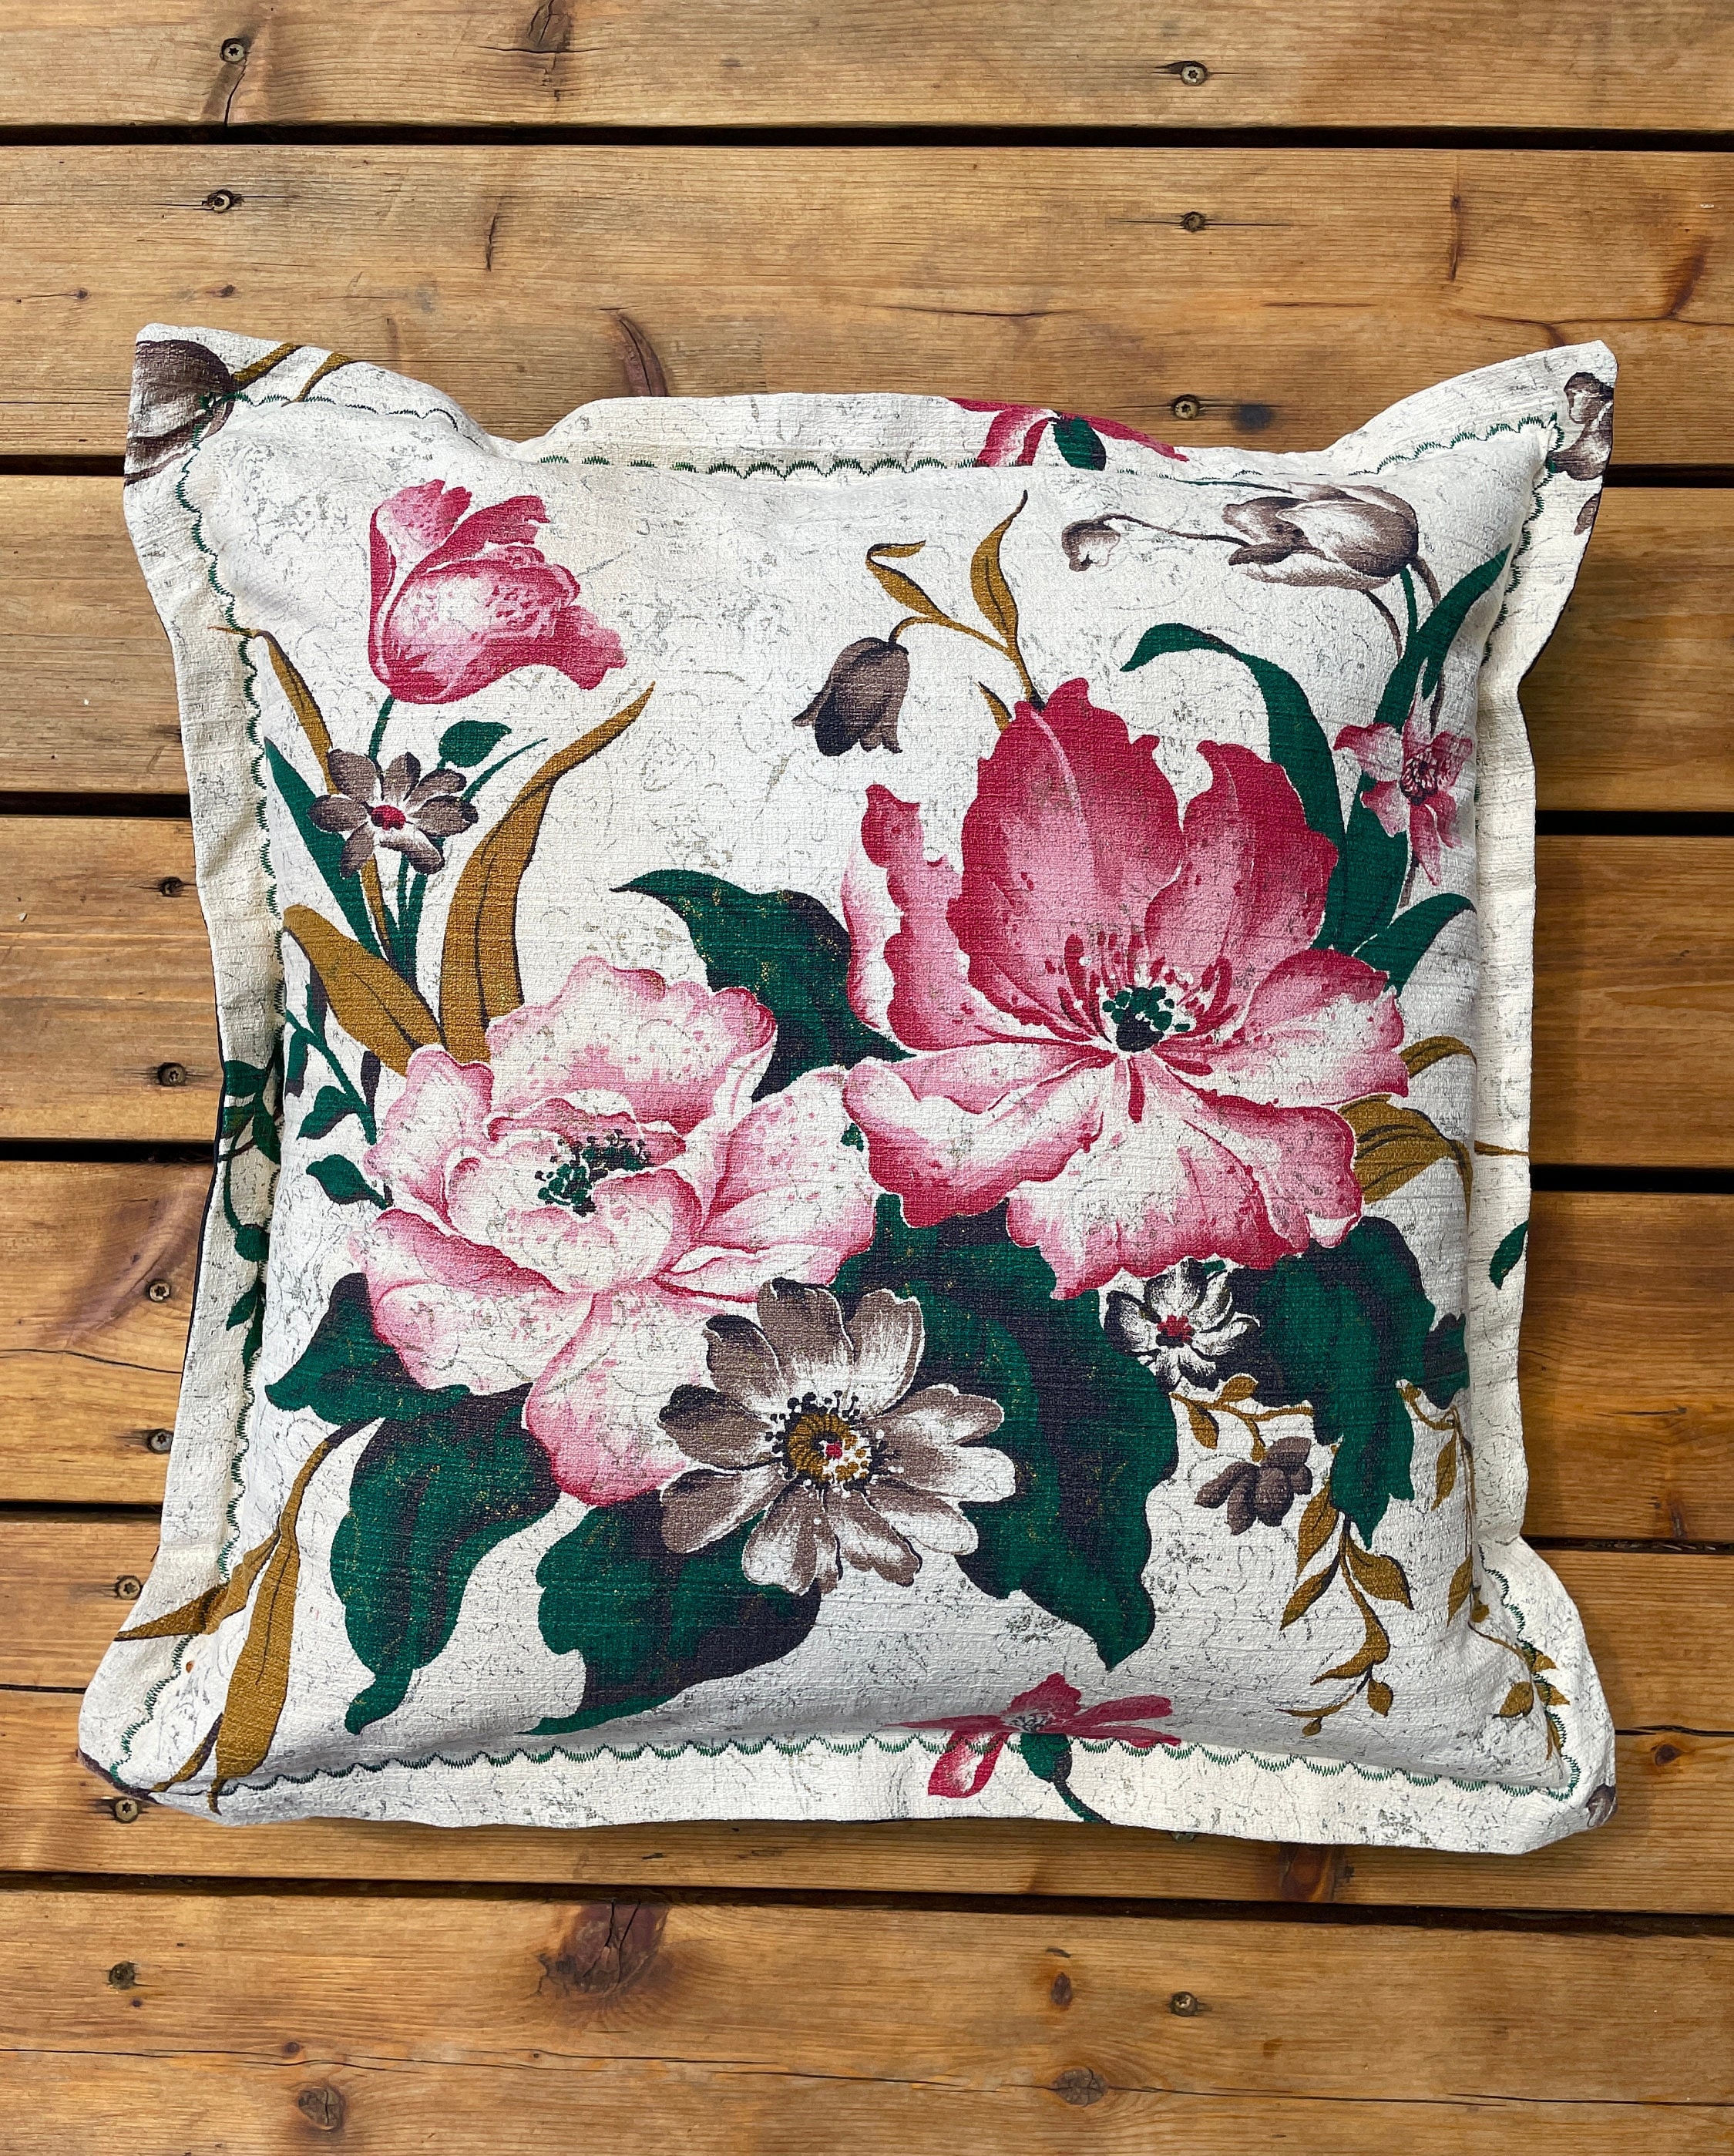 Ysahome Pink Flowers Digital Print Pillow Cover - Queen Perfume Cushion  Cover - Book and Vase Decor …See more Ysahome Pink Flowers Digital Print